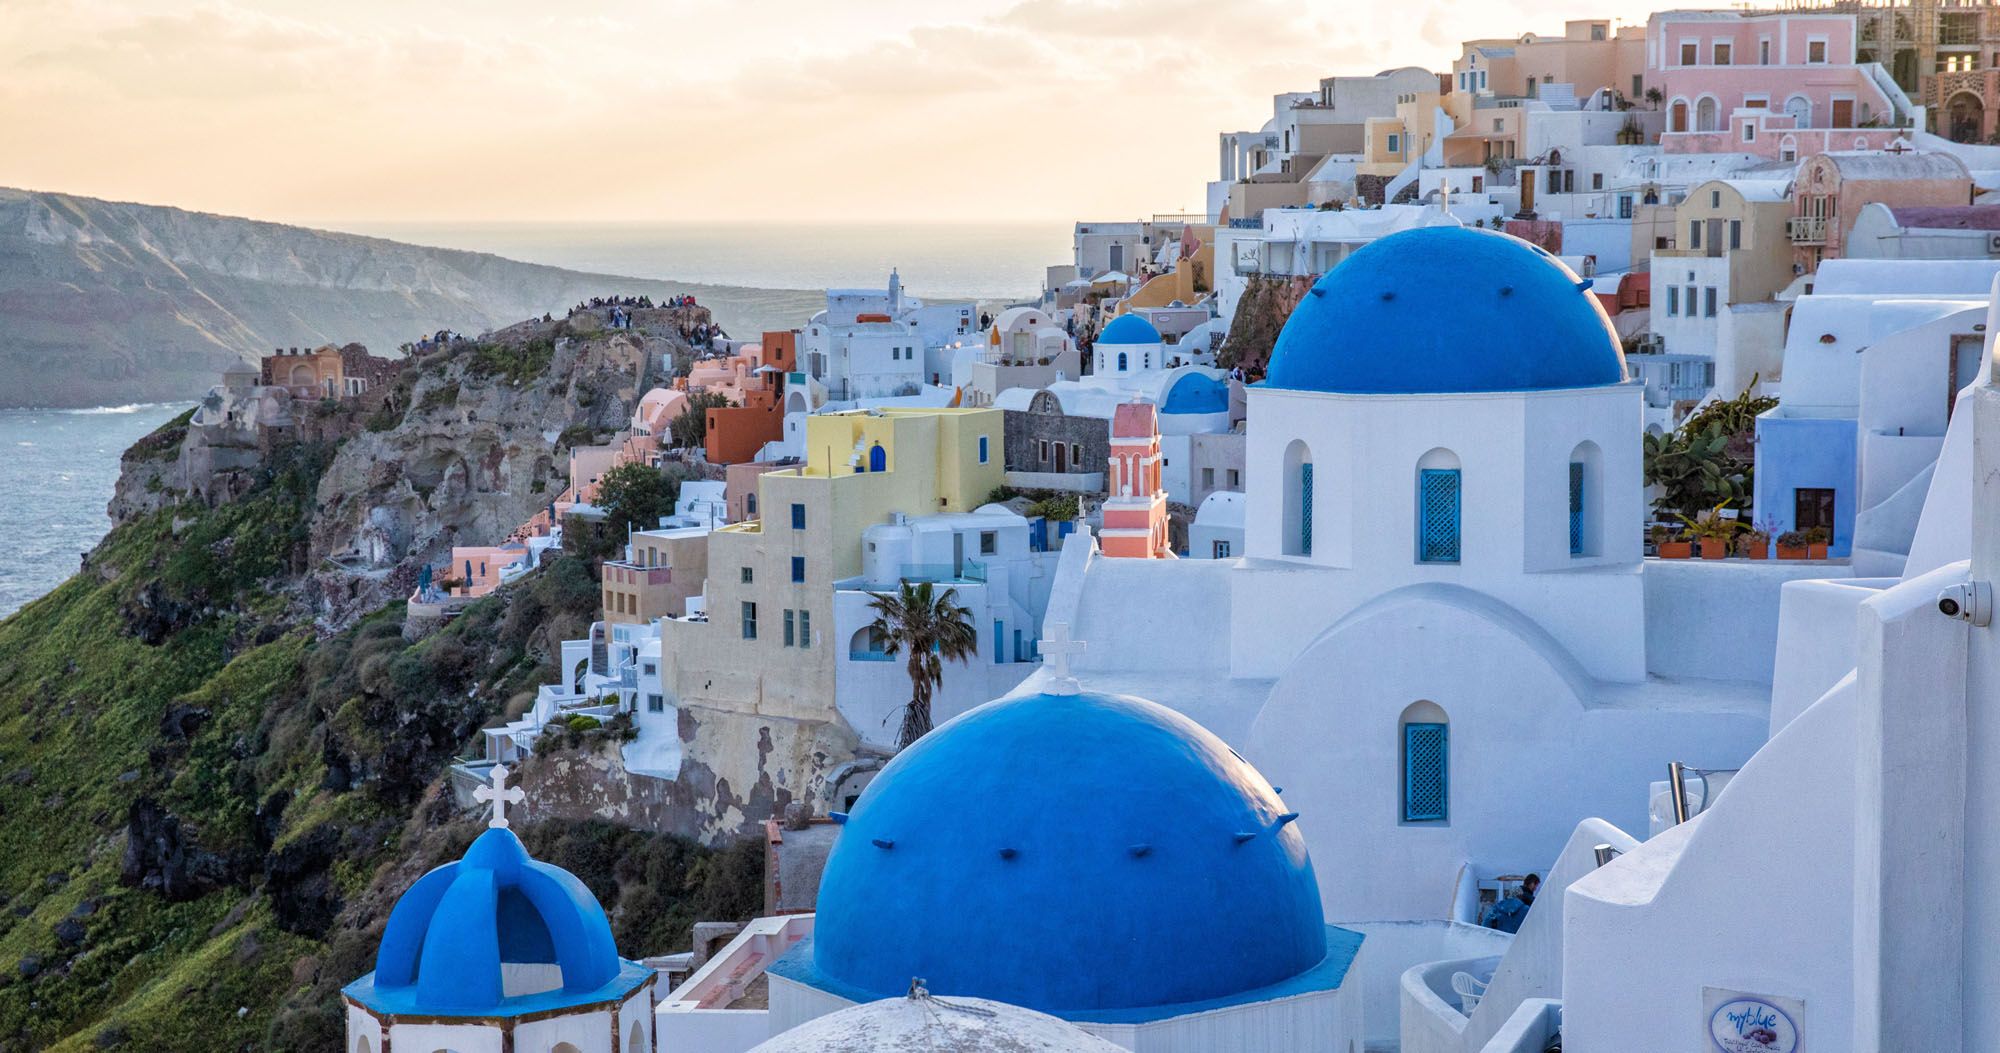 Featured image for “10 Day Greece Itinerary: Santorini, Naxos, Mykonos & Athens”